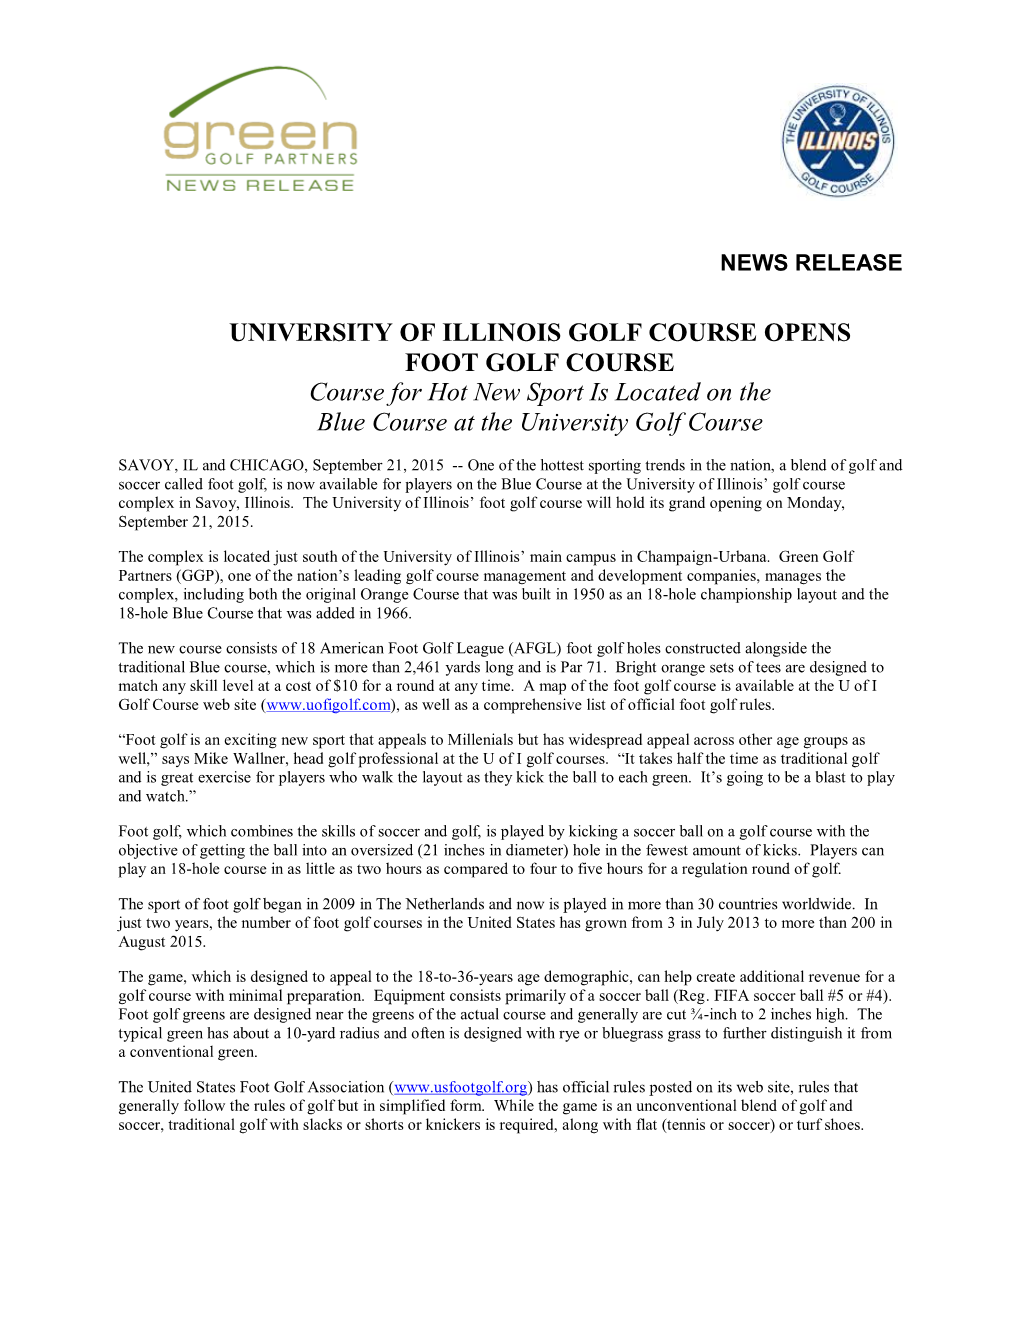 UNIVERSITY of ILLINOIS GOLF COURSE OPENS FOOT GOLF COURSE Course for Hot New Sport Is Located on the Blue Course at the University Golf Course